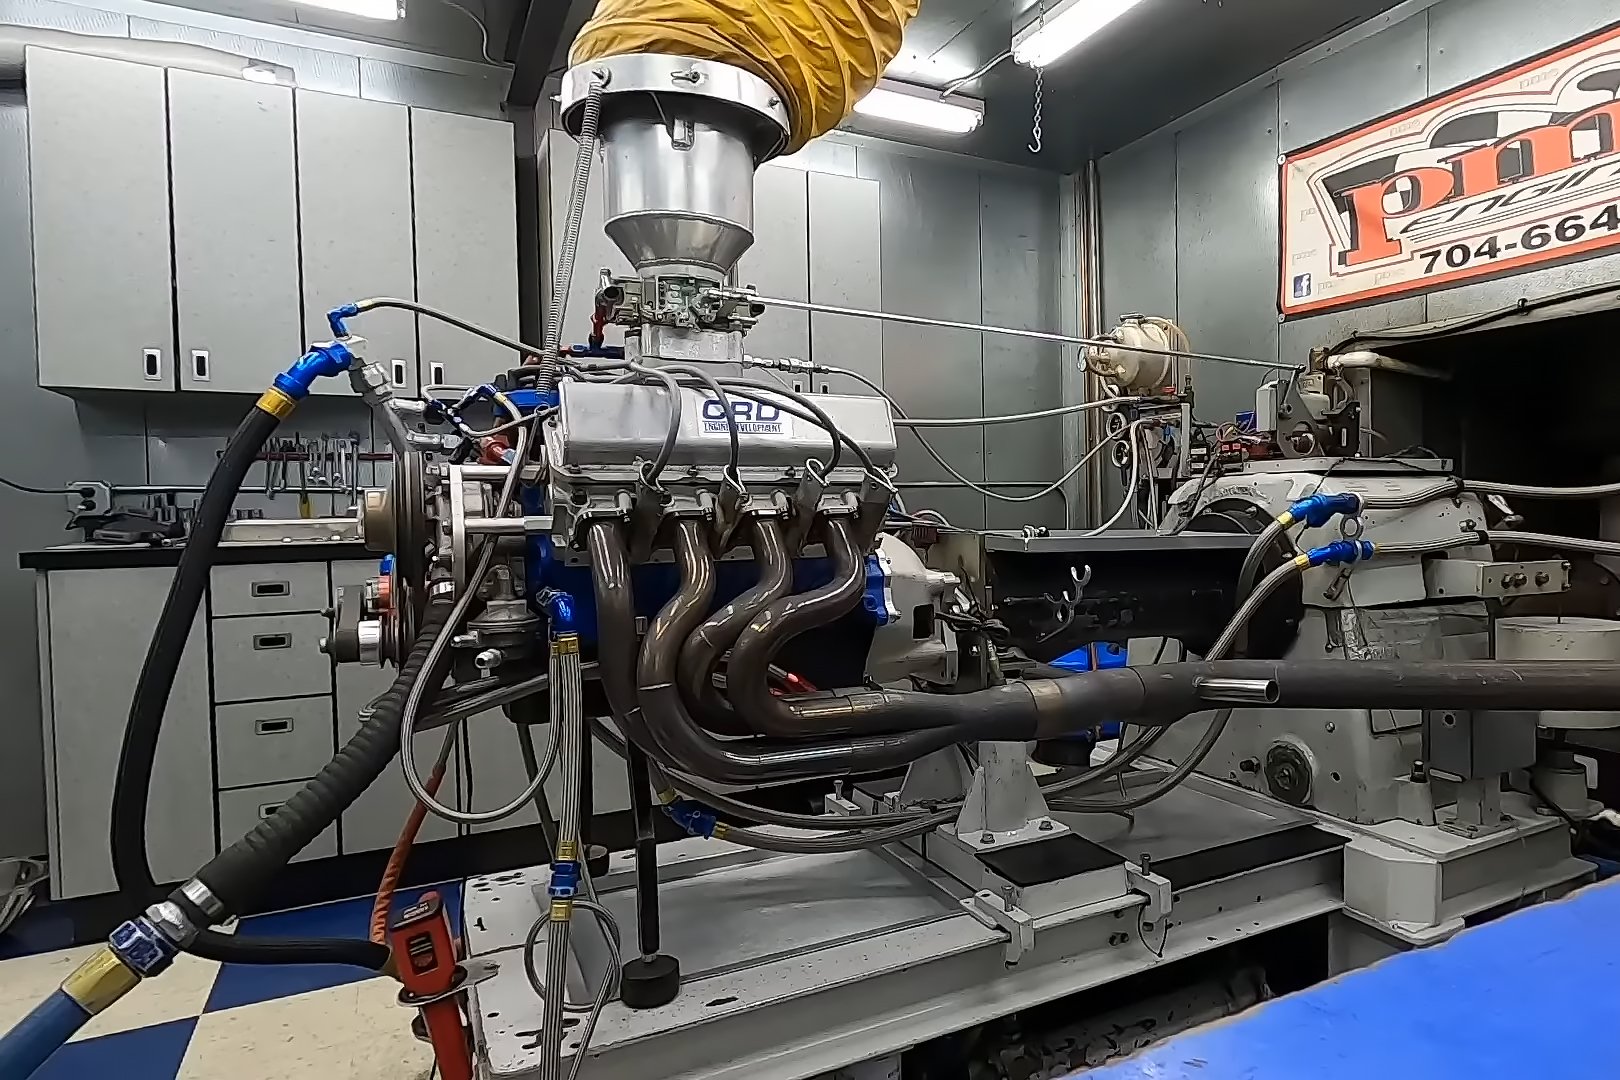 Opening A Time Capsule — Dynoing A 1990s NASCAR Engine in 2022